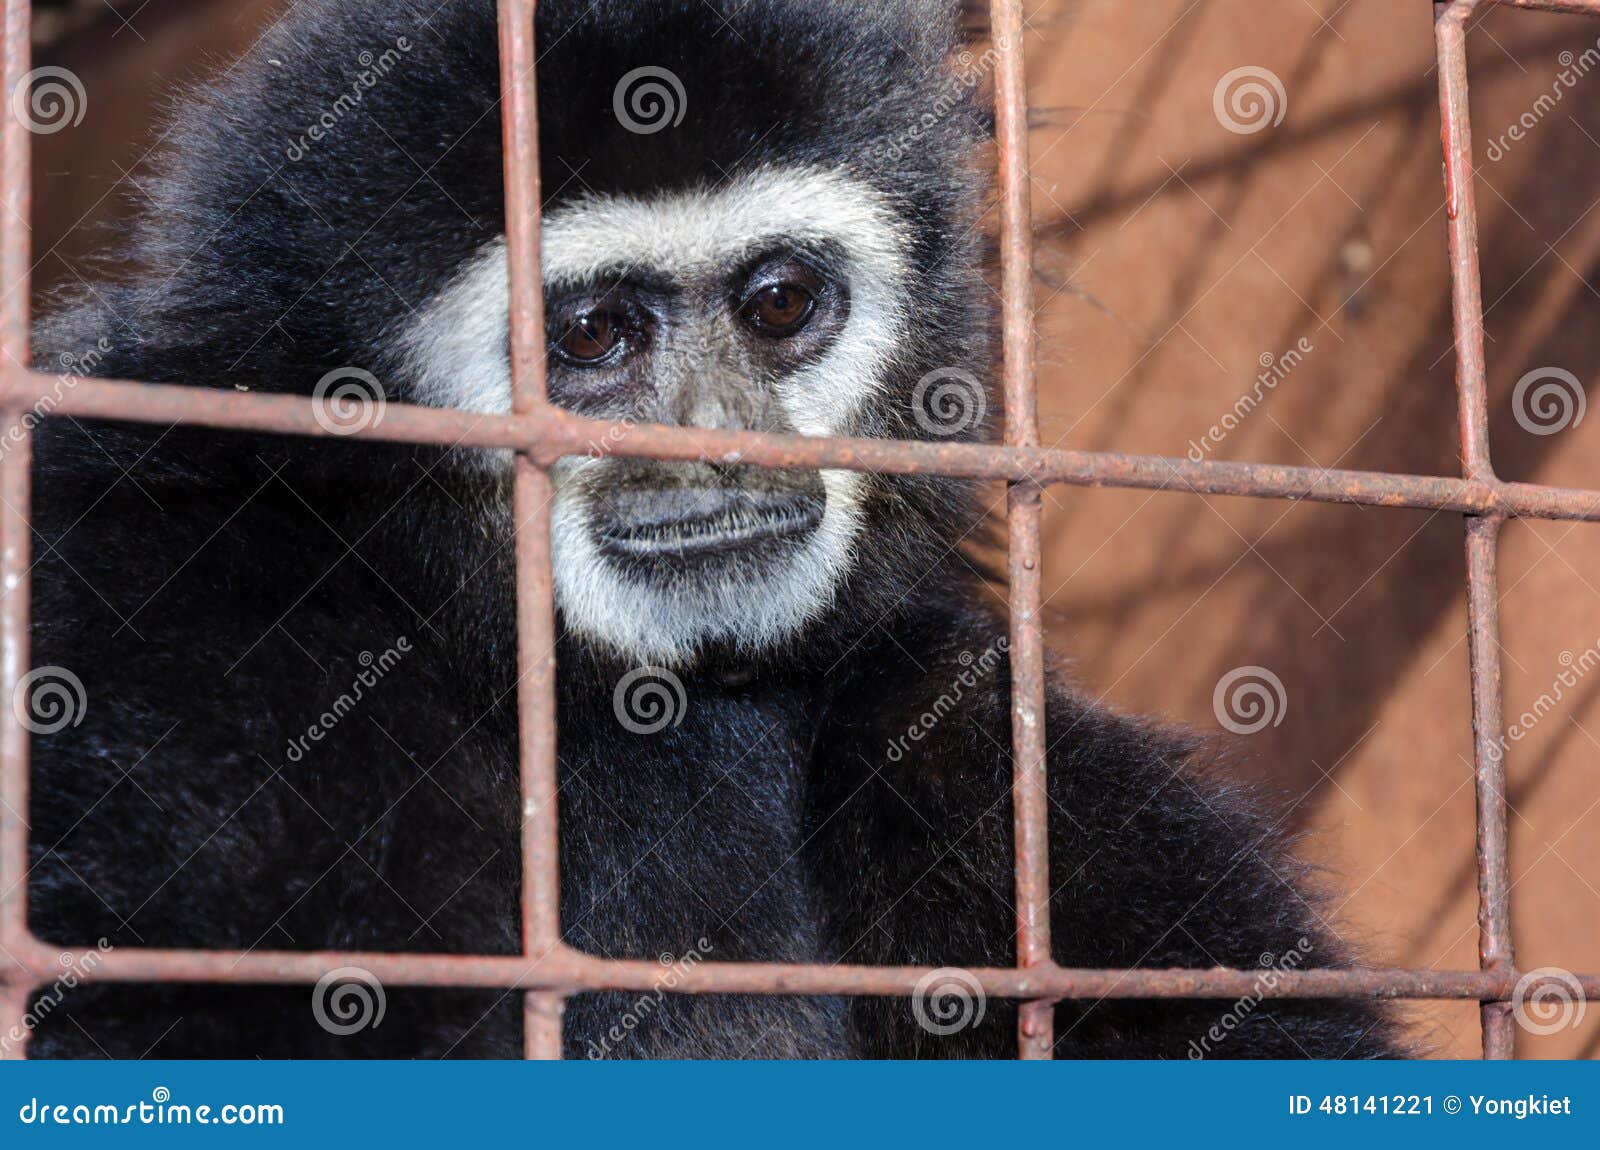 face and eyes downcast of gibbon in a cage